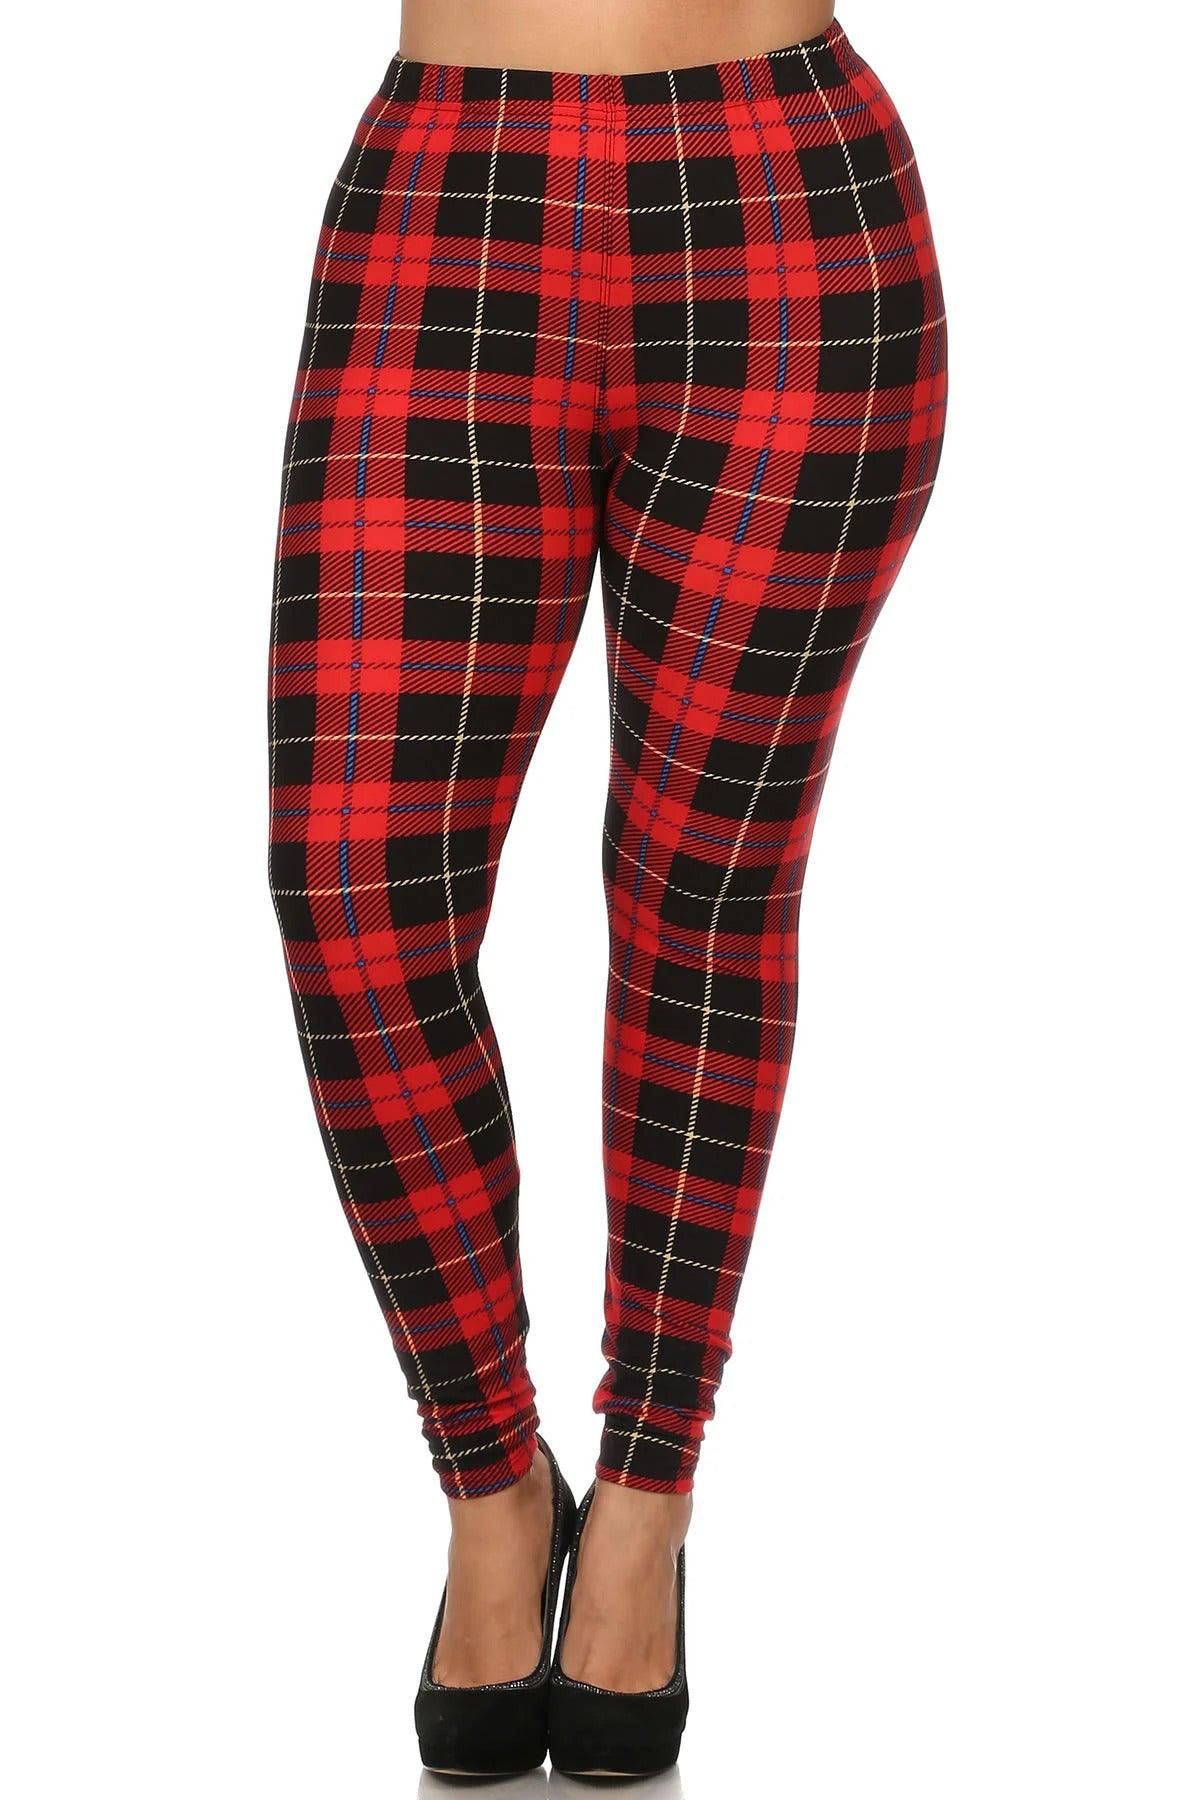 Plus Size Plaid & Checkered Print, Full Length Leggings In A Fitted Style